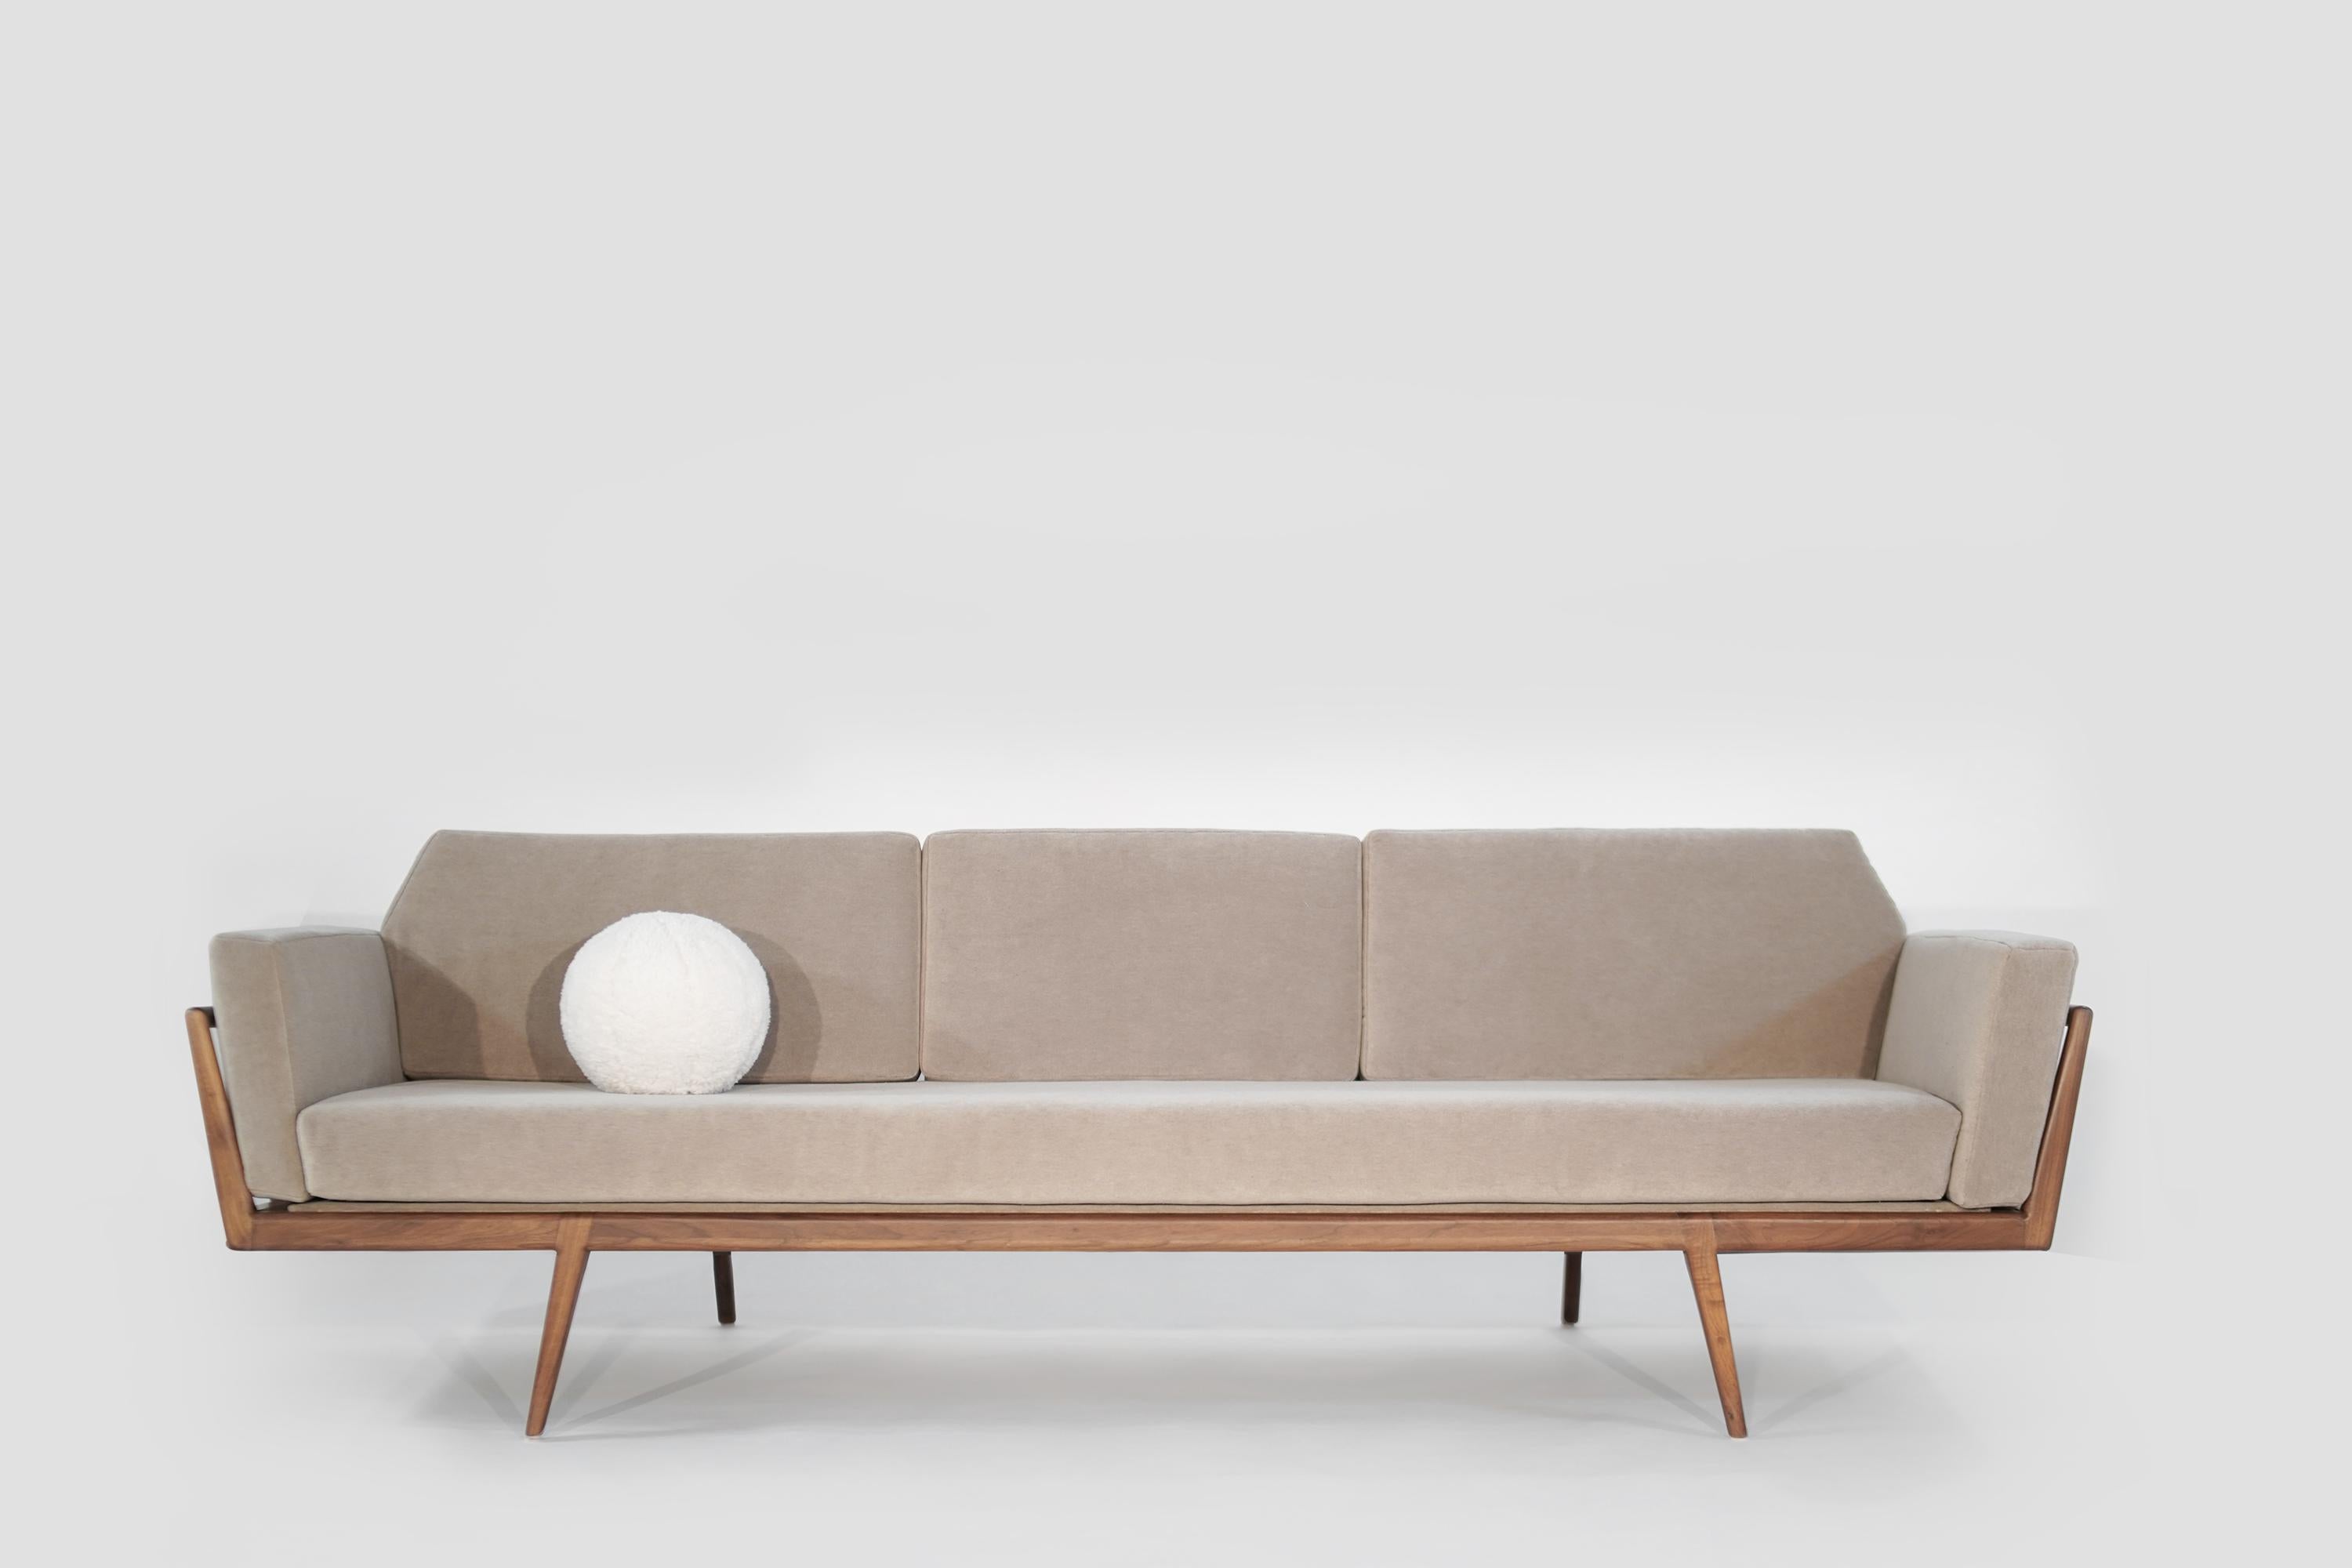 Mel Smilow rail back sofa for Smilow-Thielle in excellent restored condition. The walnut frame has been professionally restored with one of the back legs professionally fixed for stability. The new upholstery boasts hand-cut high-density foam with